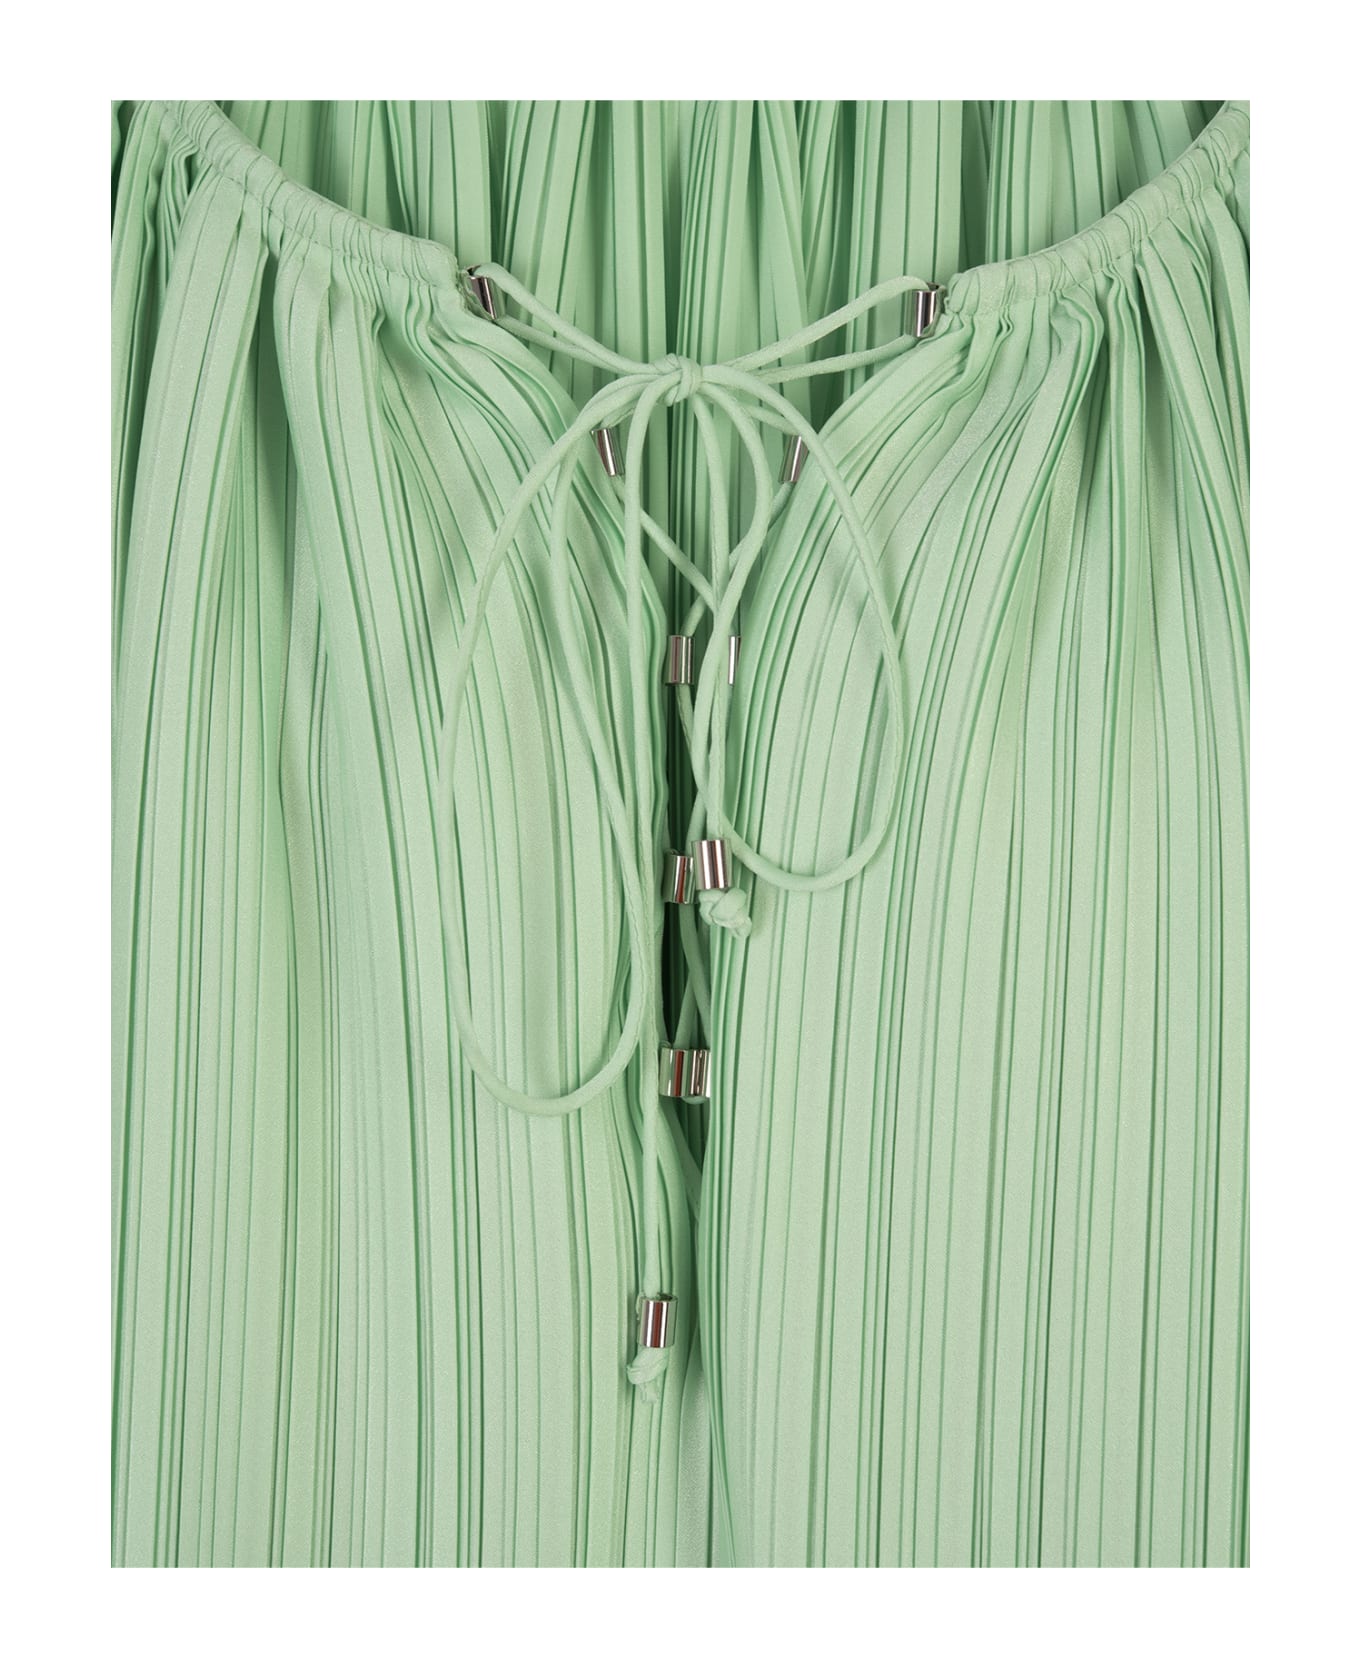 Lanvin Green Pleated Blouse - Green